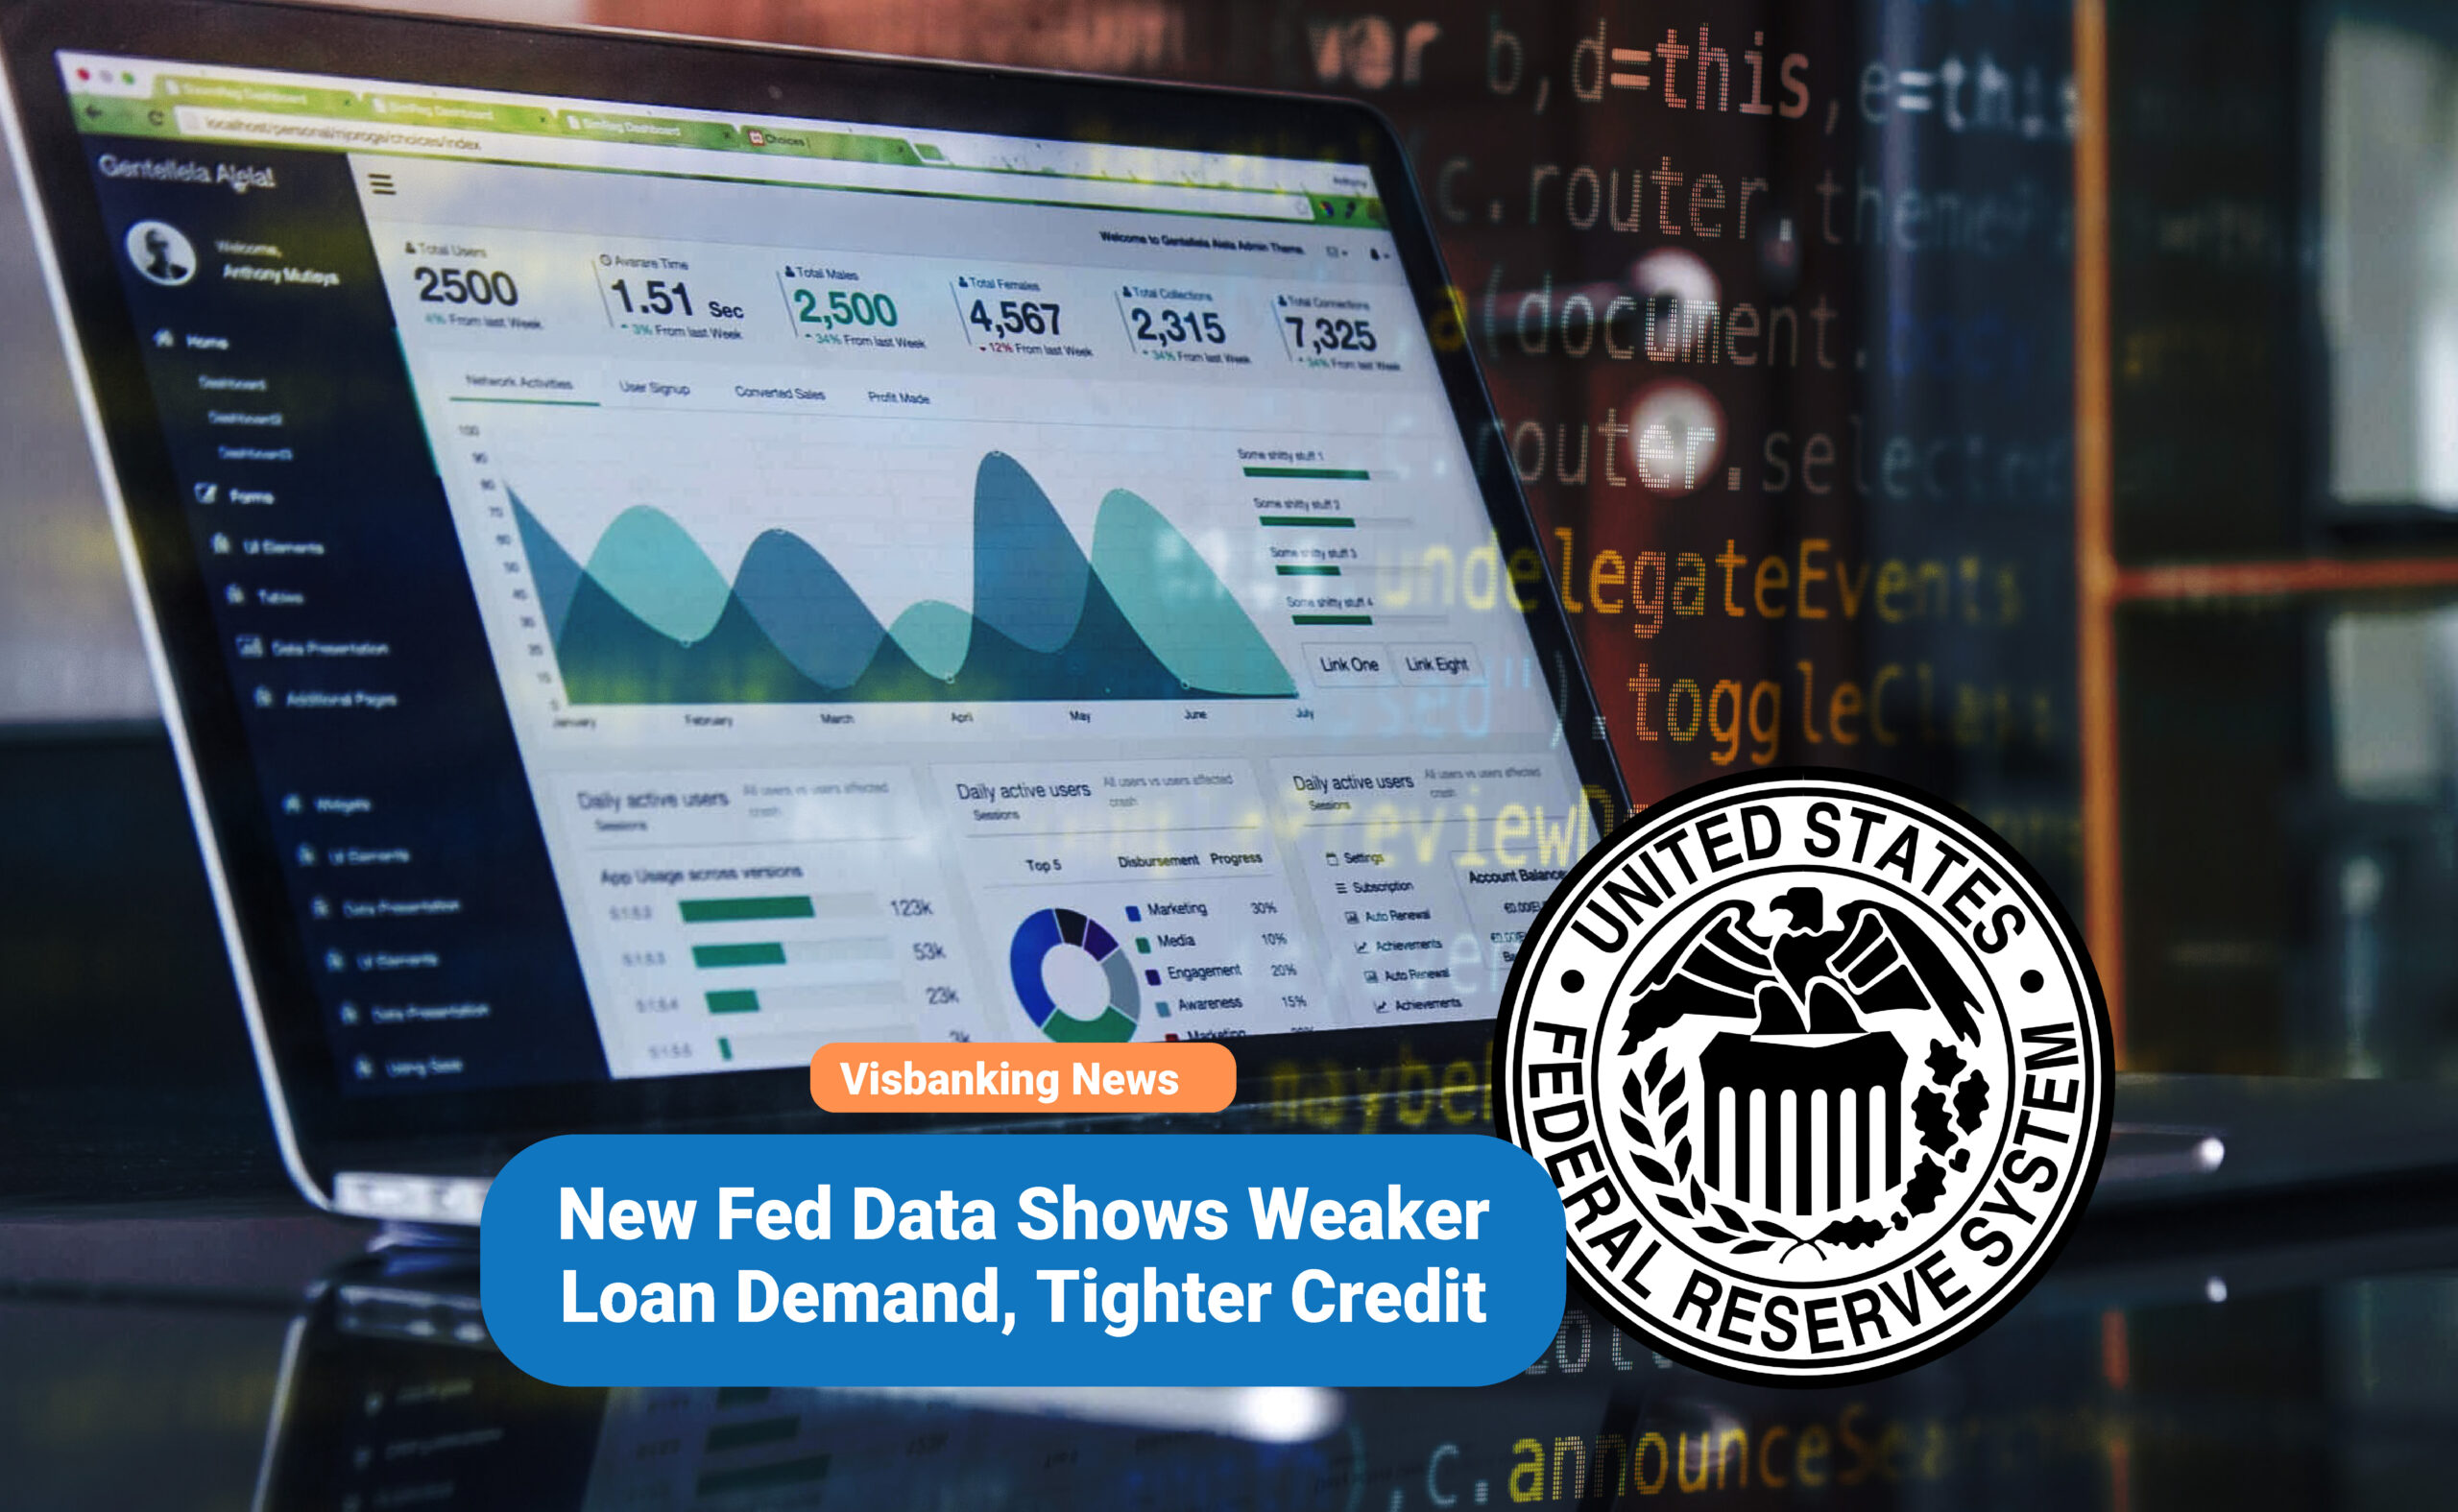 New Fed Data Shows Weaker Loan Demand, Tighter Credit